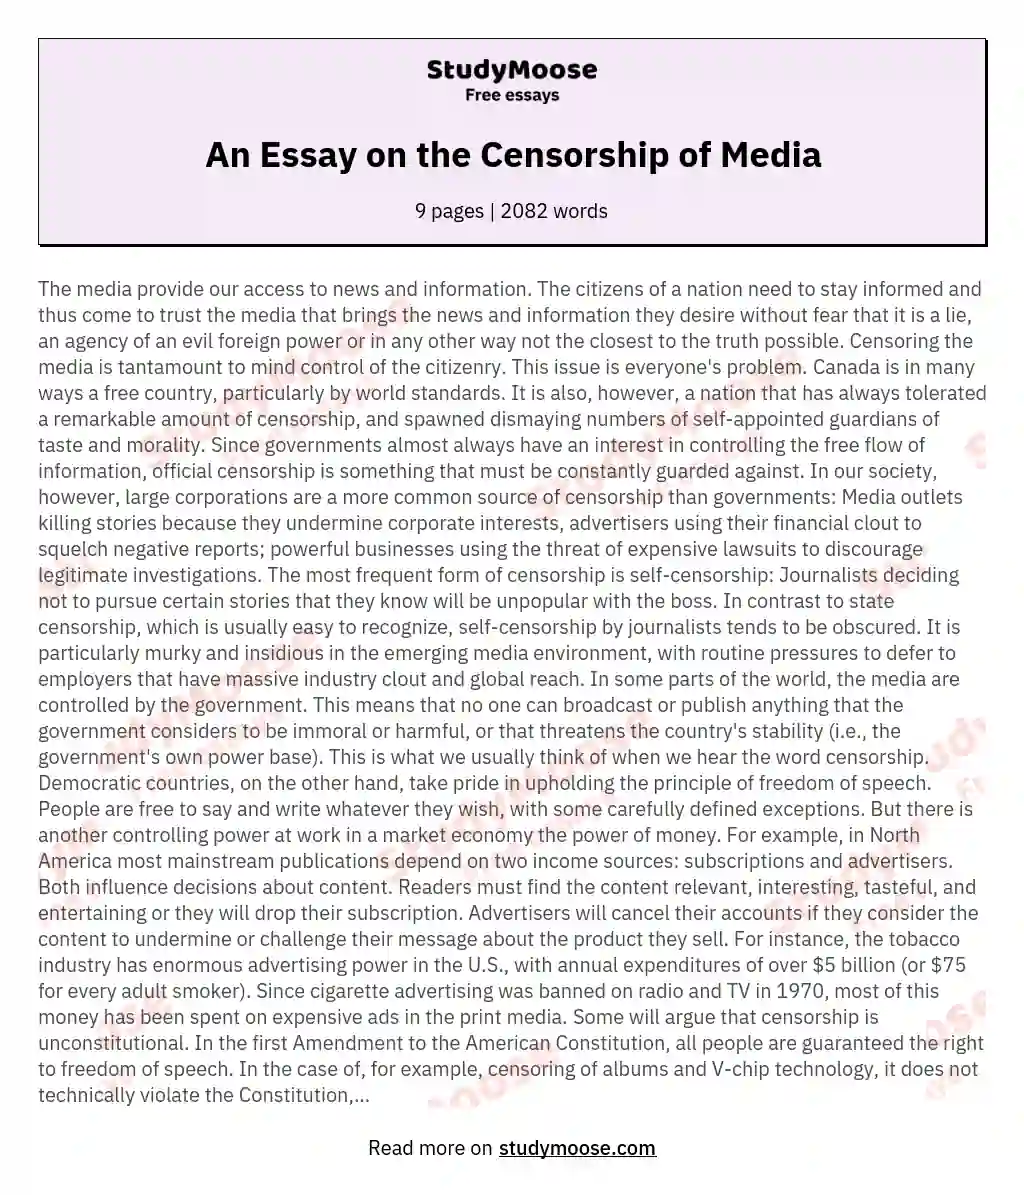 An Essay on the Censorship of Media